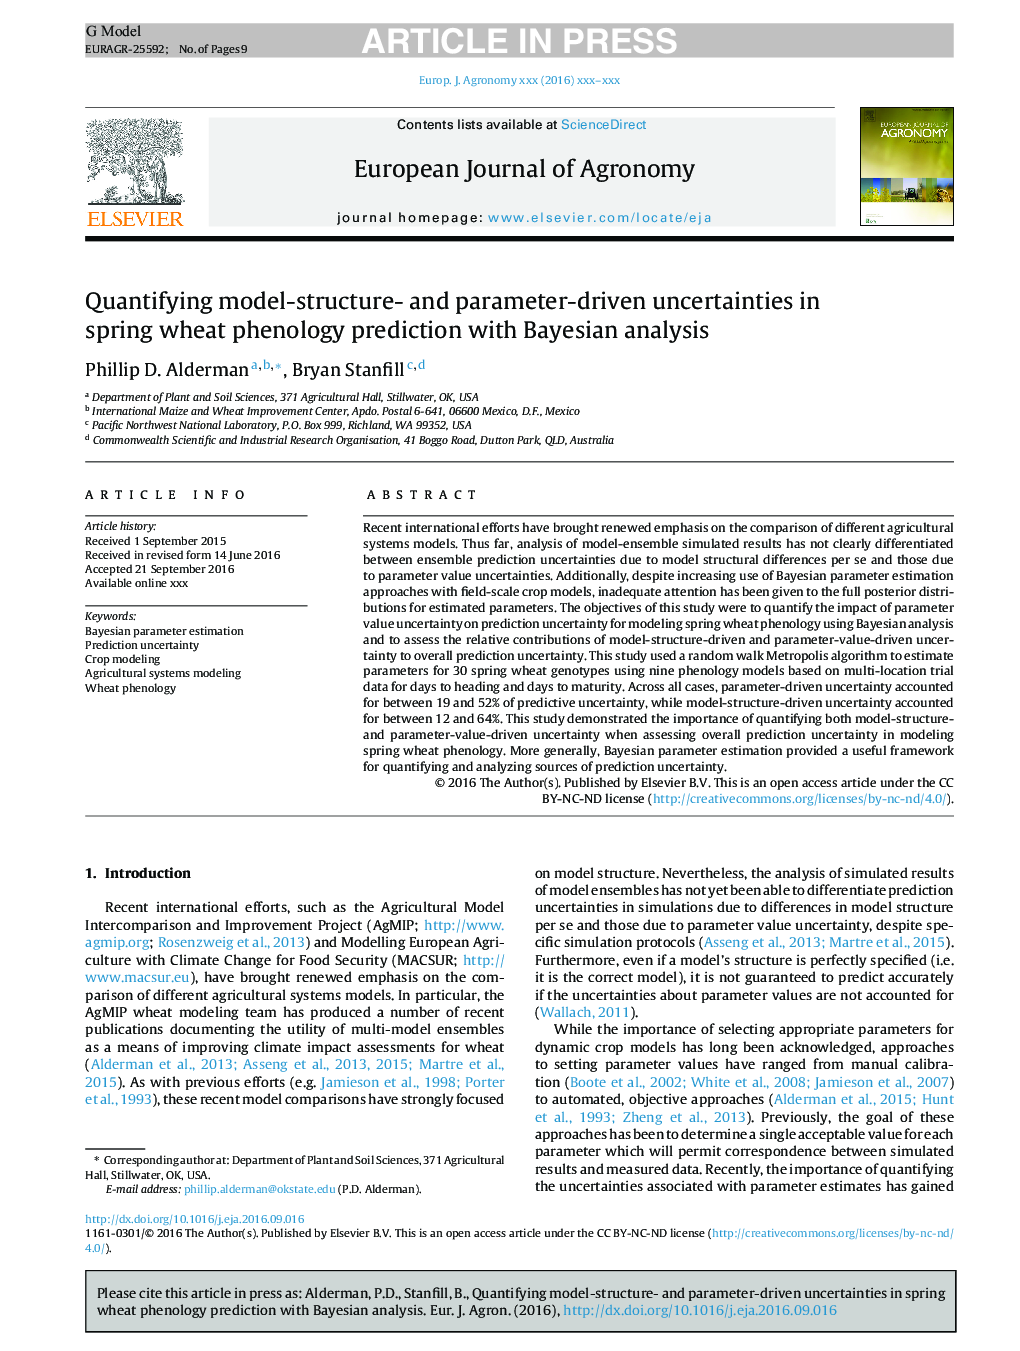 Quantifying model-structure- and parameter-driven uncertainties in spring wheat phenology prediction with Bayesian analysis